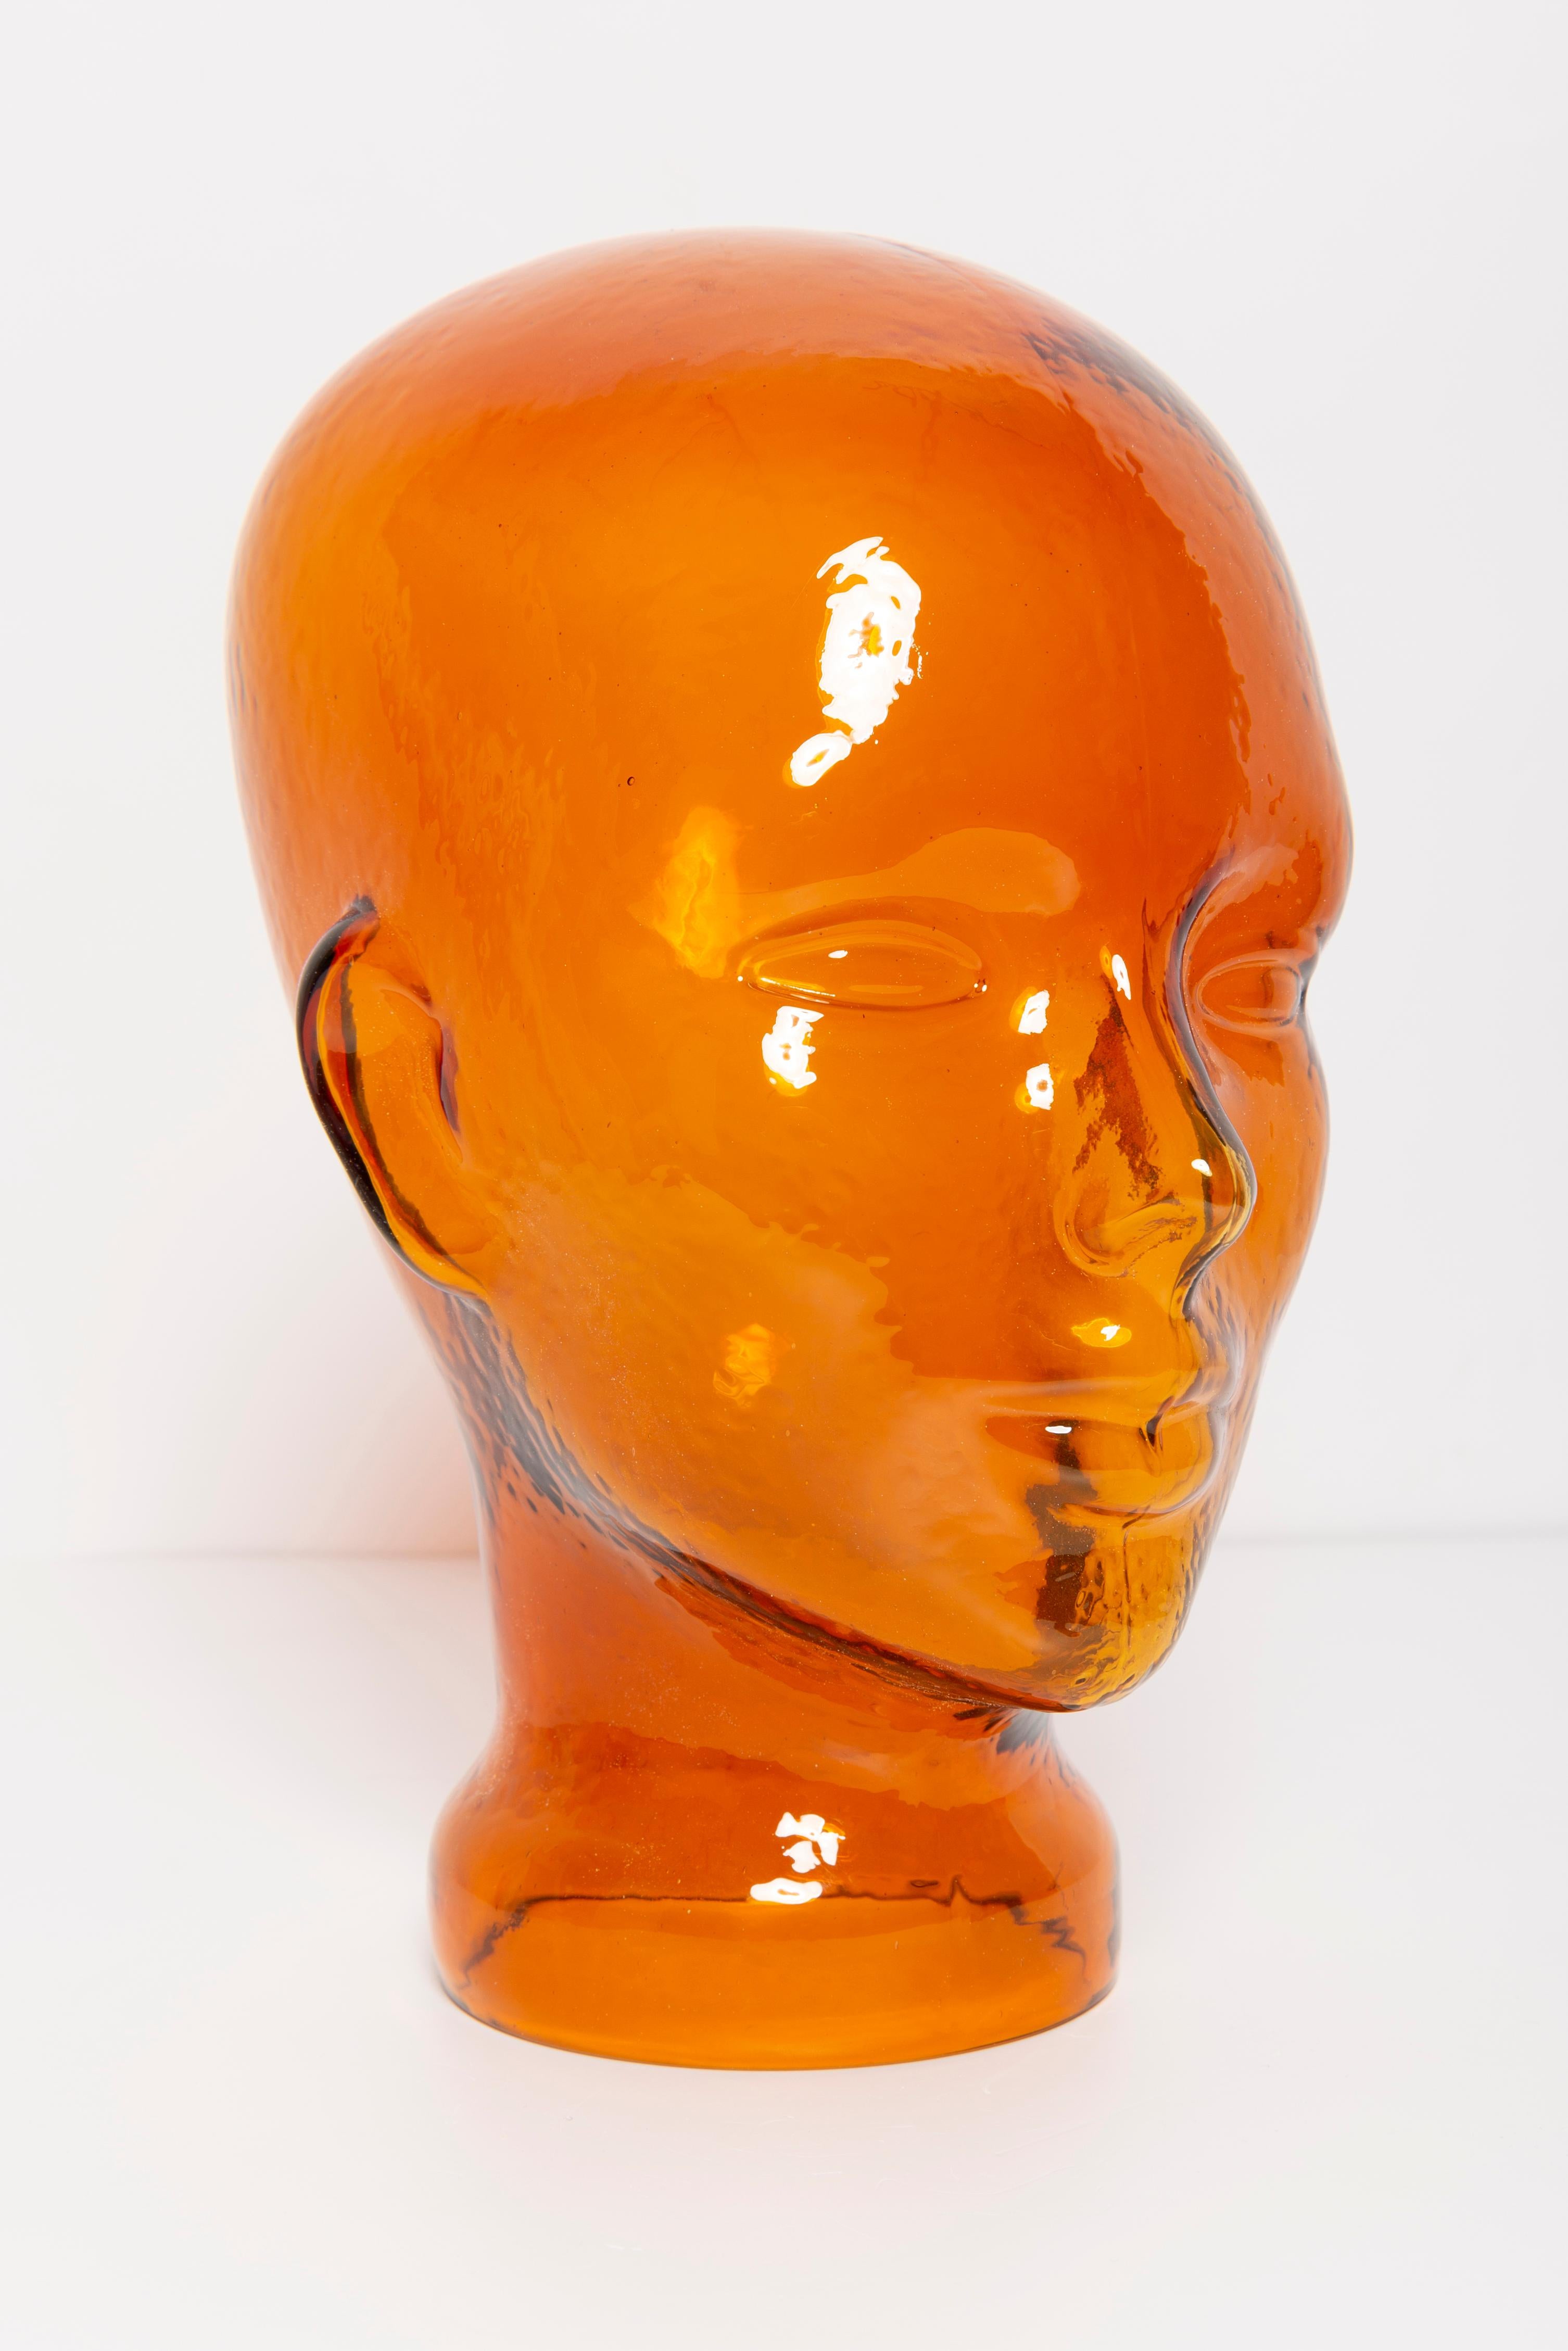 Life-size glass head in a unique beautiful orange color. Produced in a German steelworks in the 1970s. Perfect condition. A perfect addition to the interior, photo prop, display or headphone stand.